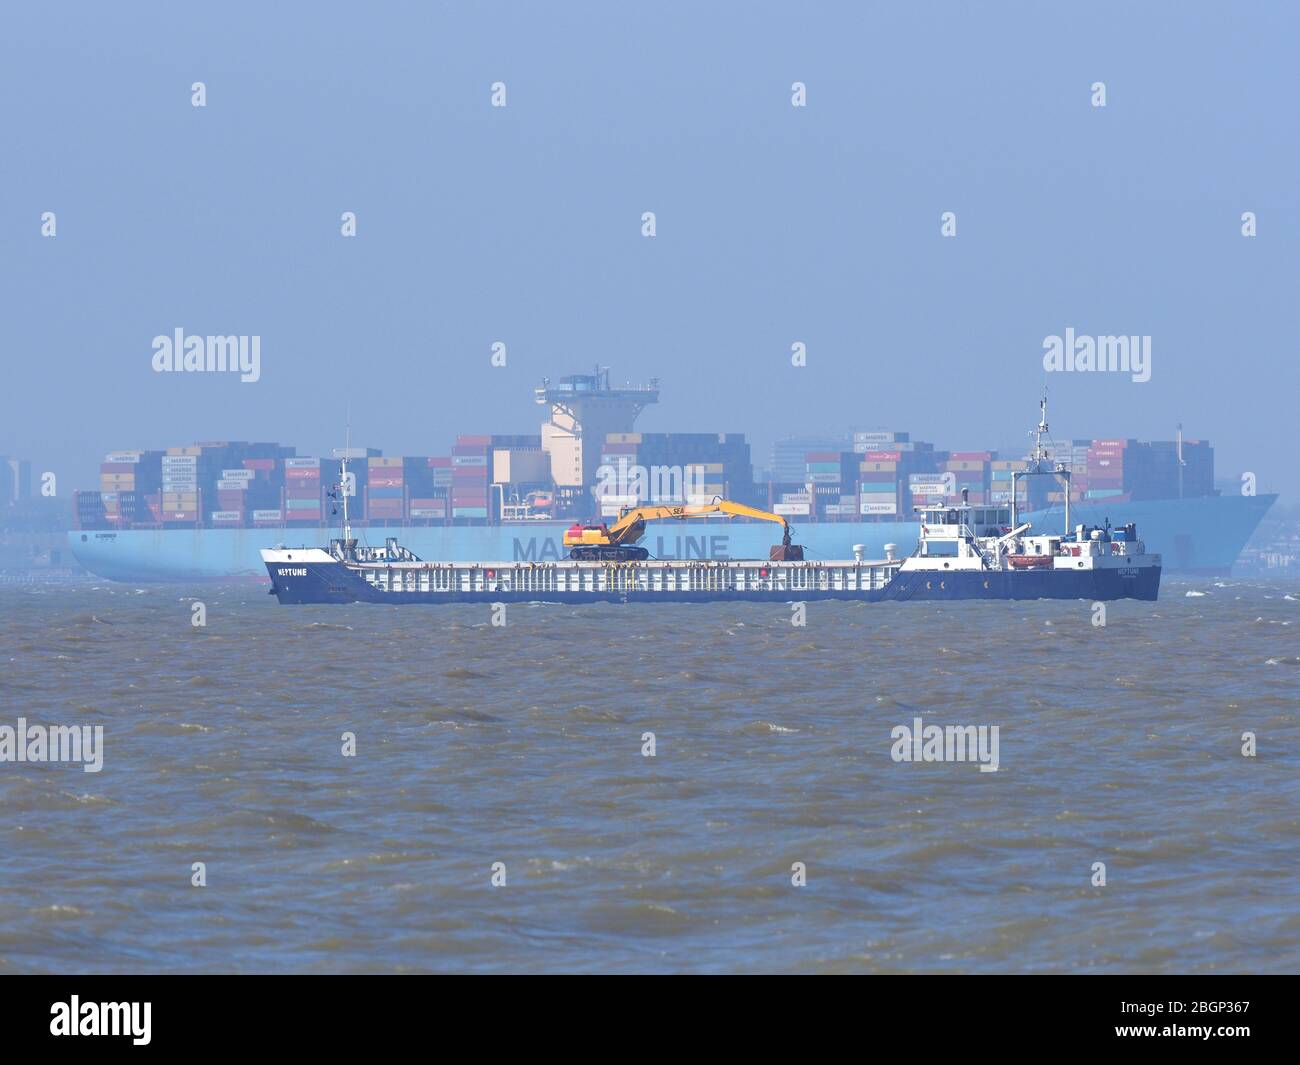 Sheerness, Kent, UK. 22nd Apr, 2020. Huge containership Emma Maersk (the largest containership in the world when launched in 2006) departs the Thames today. The Port of London reported yesterday that last week (13 April to 19 April), there wre 287 ship movements, 173 of which were piloted, adding 'the number of ship movements has fallen from the pre-coronavirus levels as supply chains progressively focus on essentials of food, medicine and electronic goods needed to help people work and stay in touch'. Credit: James Bell/Alamy Live News Stock Photo